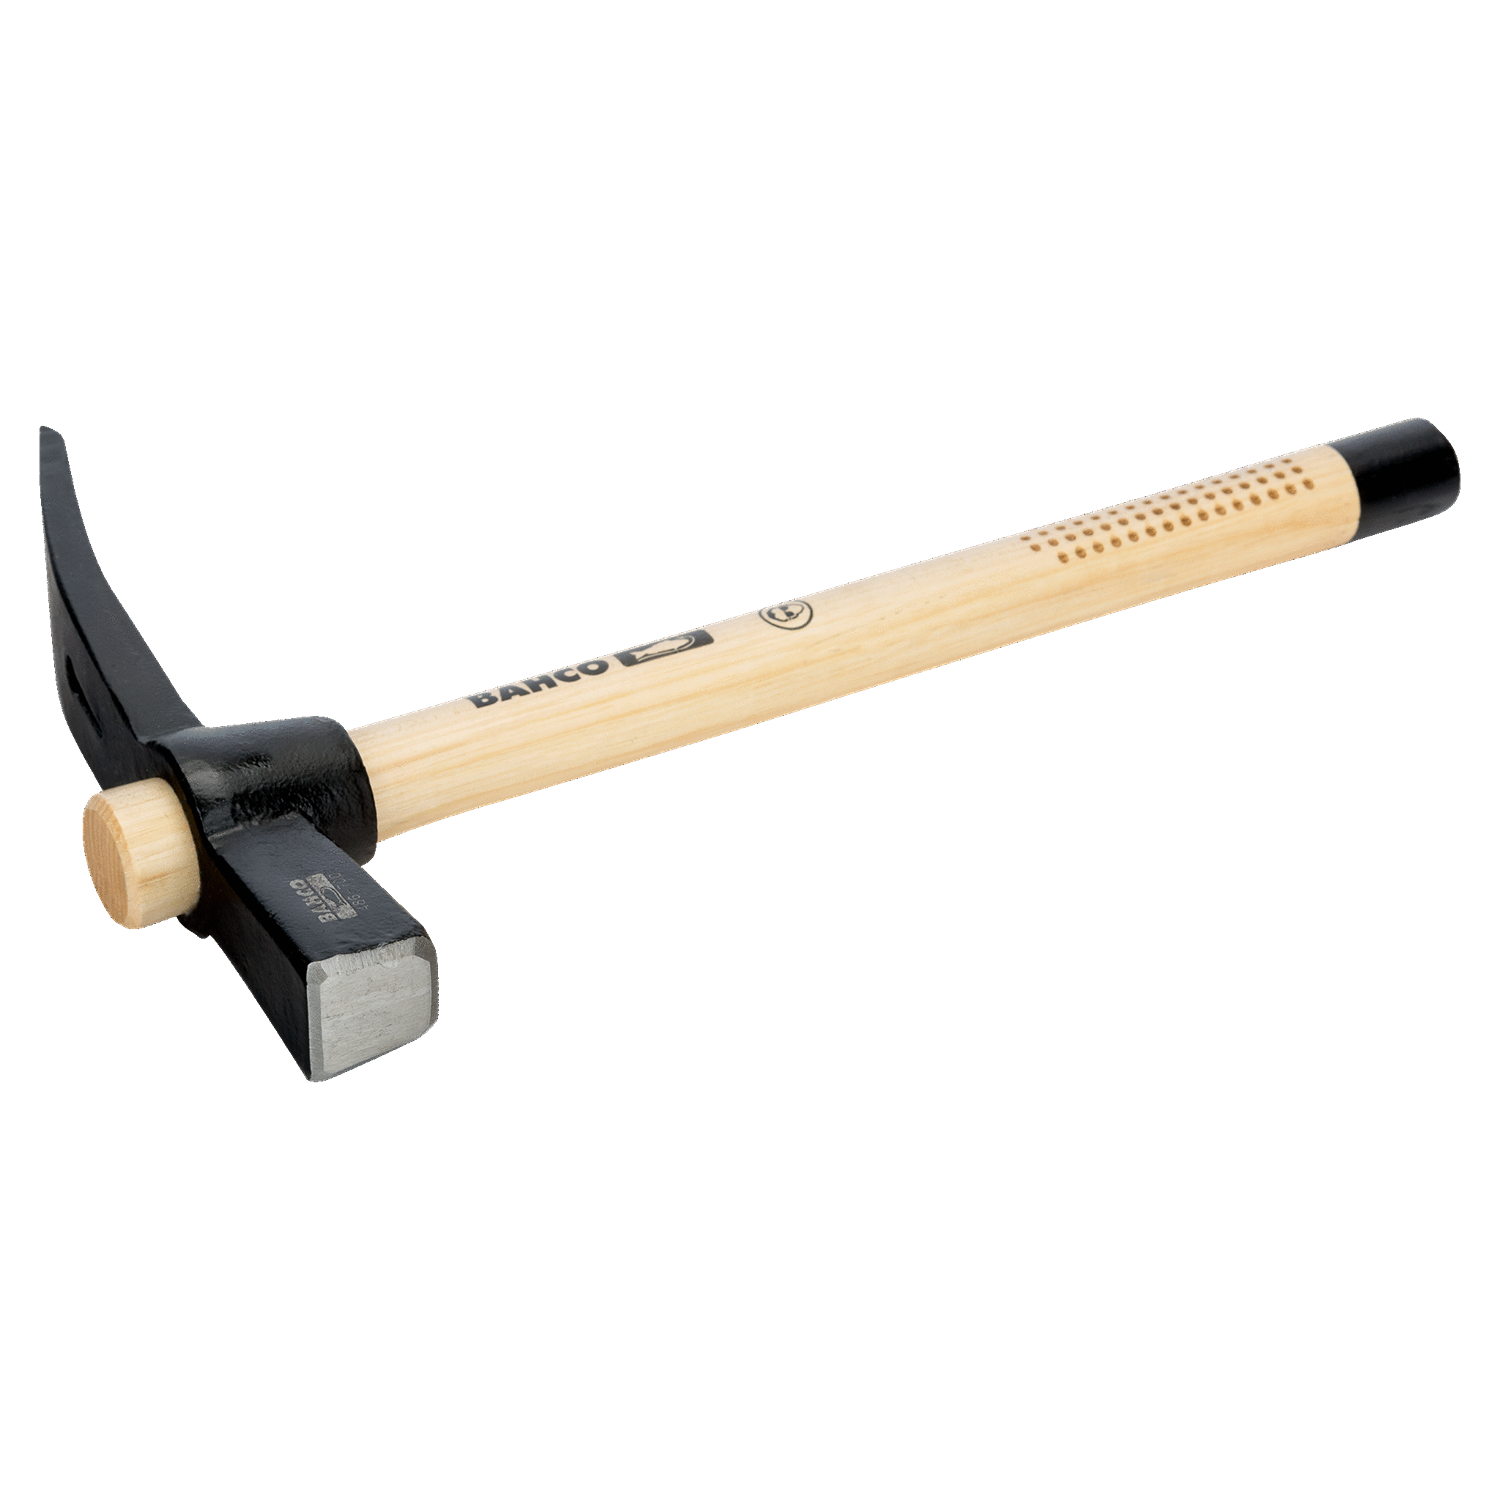 BAHCO 486-700 Spanish Type Bricklayer Hammer with Hickory Handle - Premium Bricklayer Hammer from BAHCO - Shop now at Yew Aik.